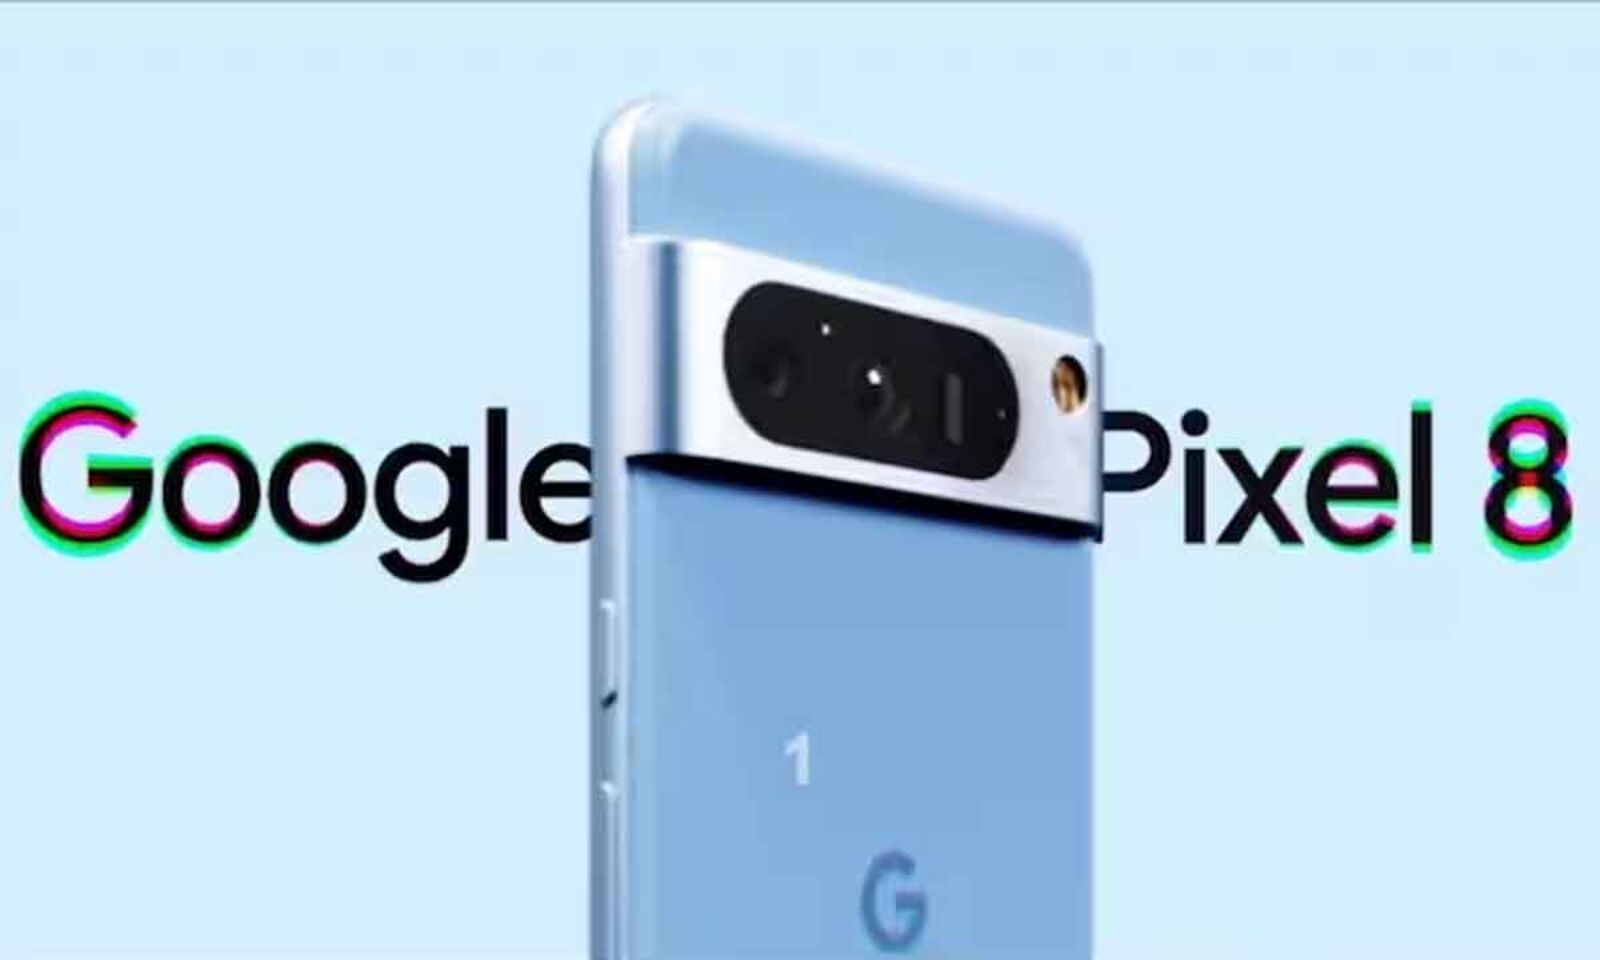 What Will Be The Price Of Google Pixel 8 Series?